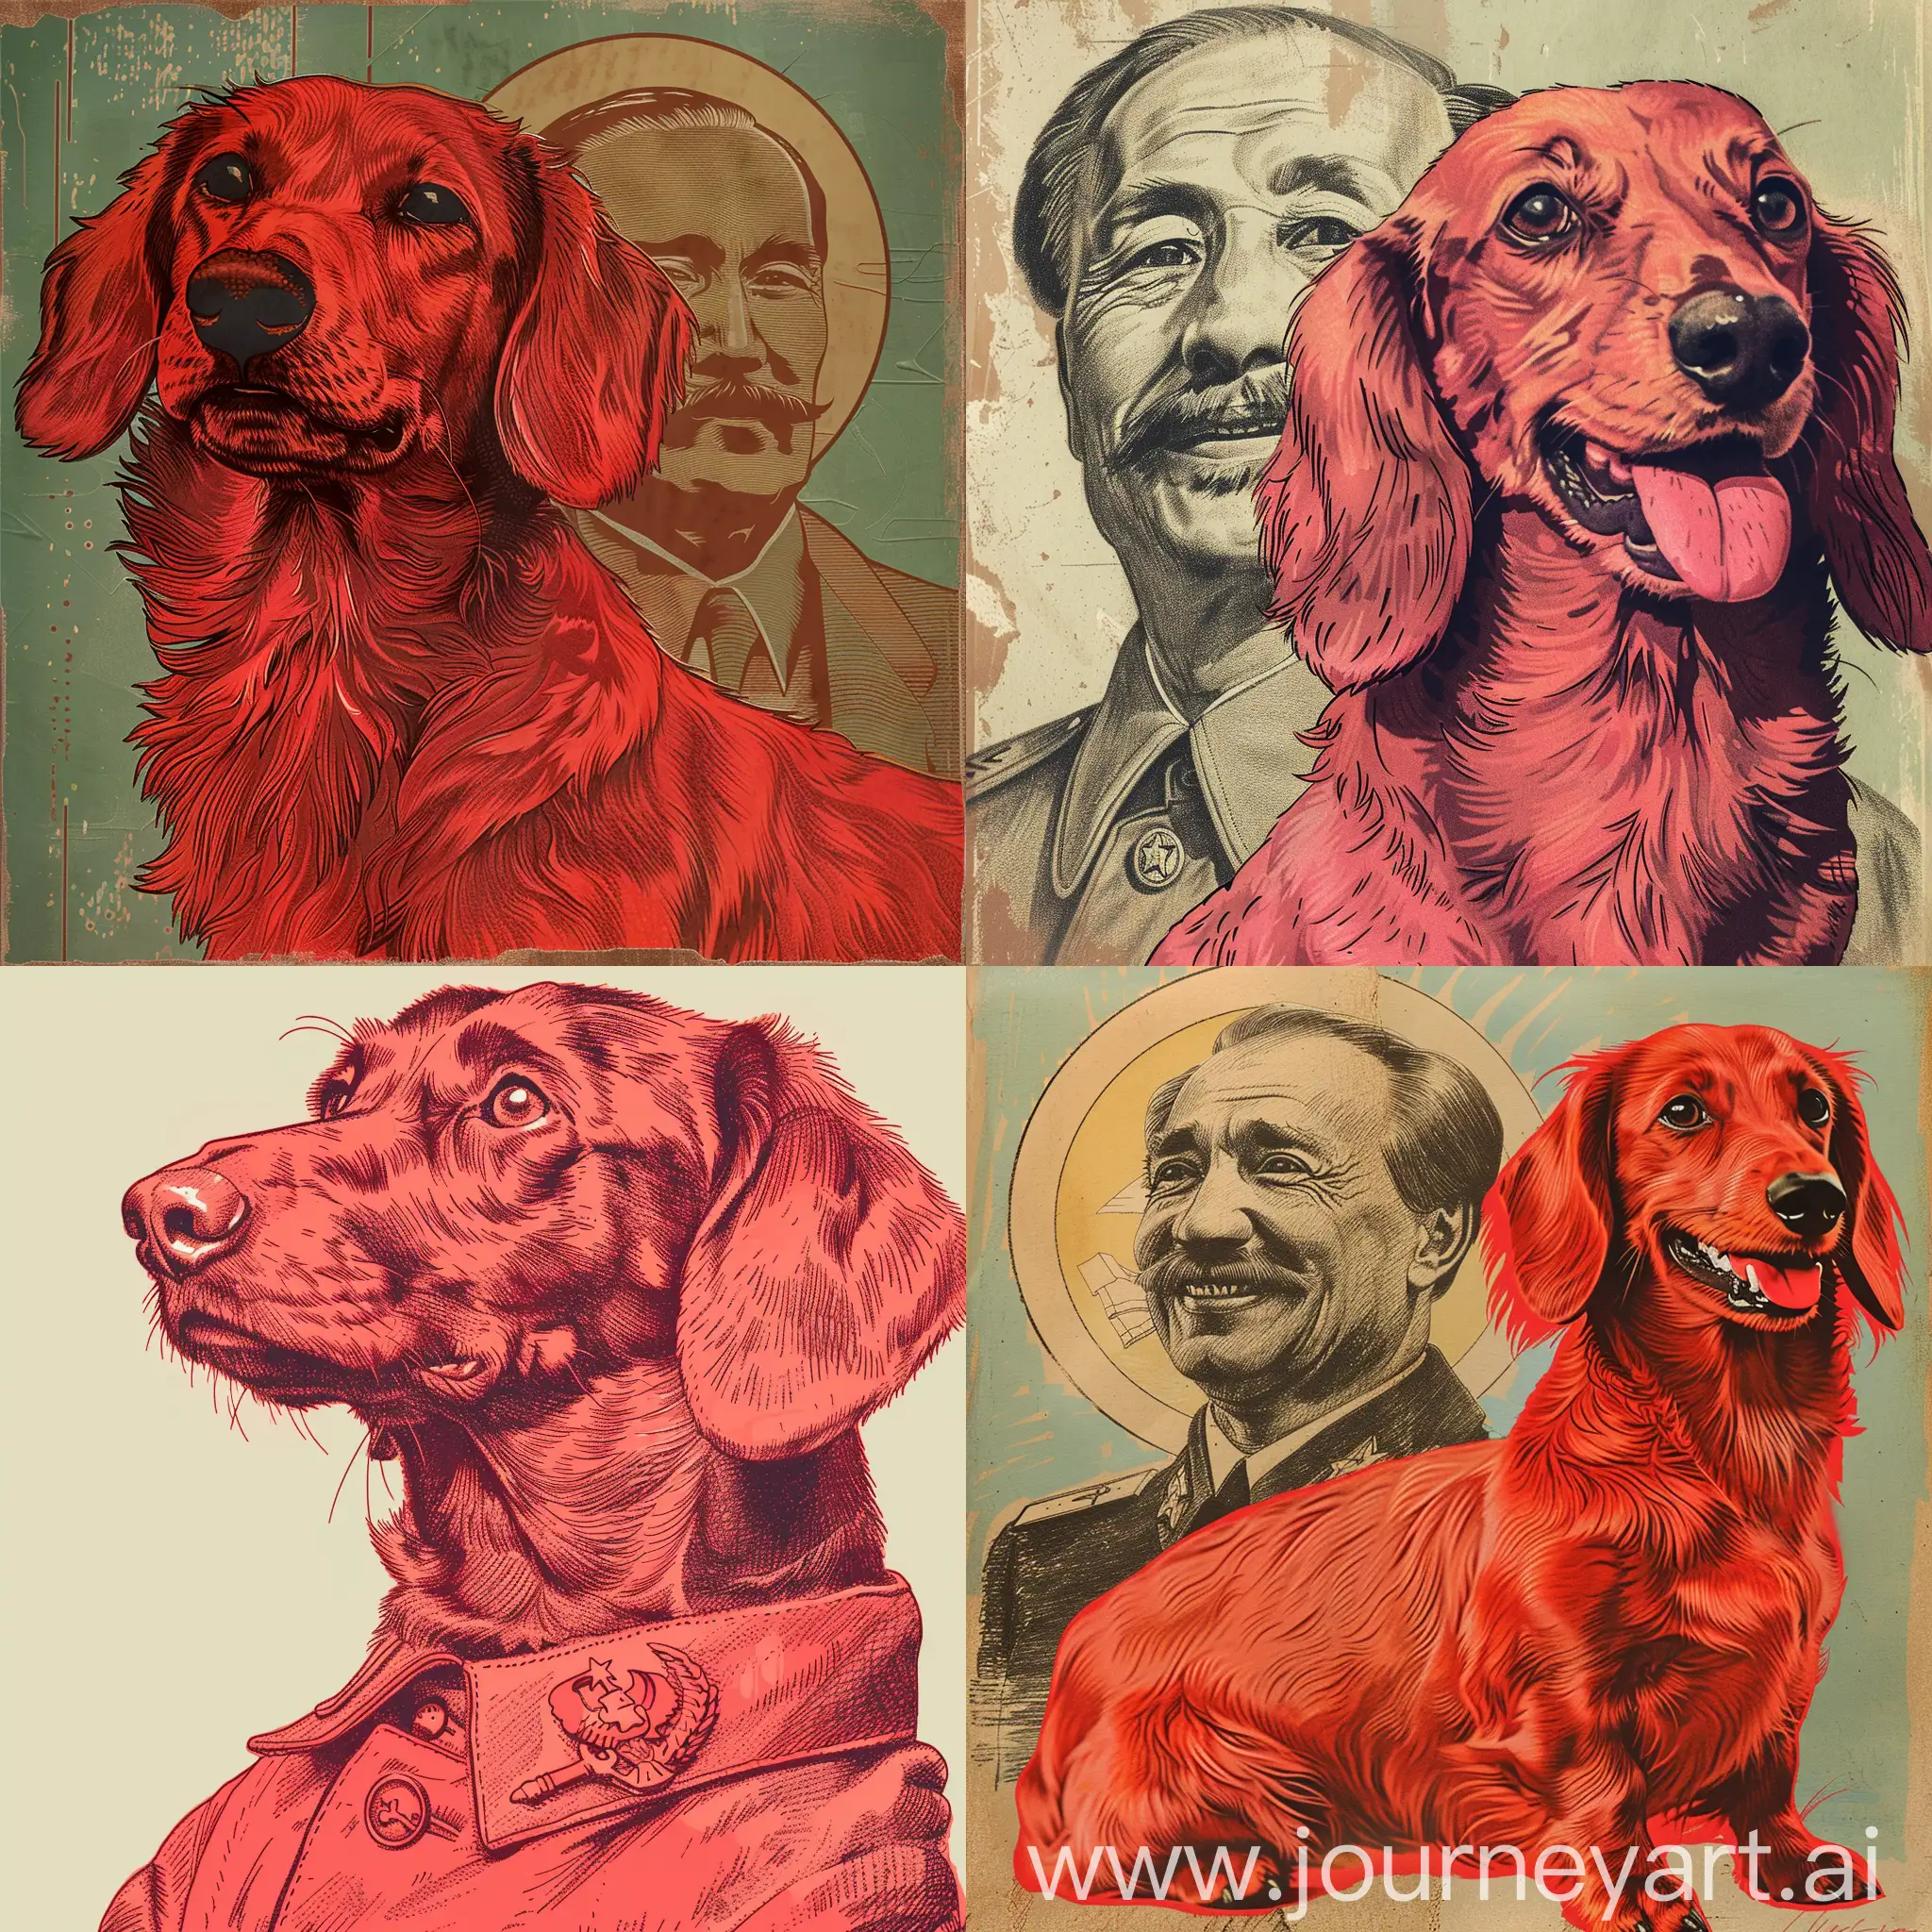 red dachsund drawn in Soviet realism style on a portrait in similar style as communist leader
